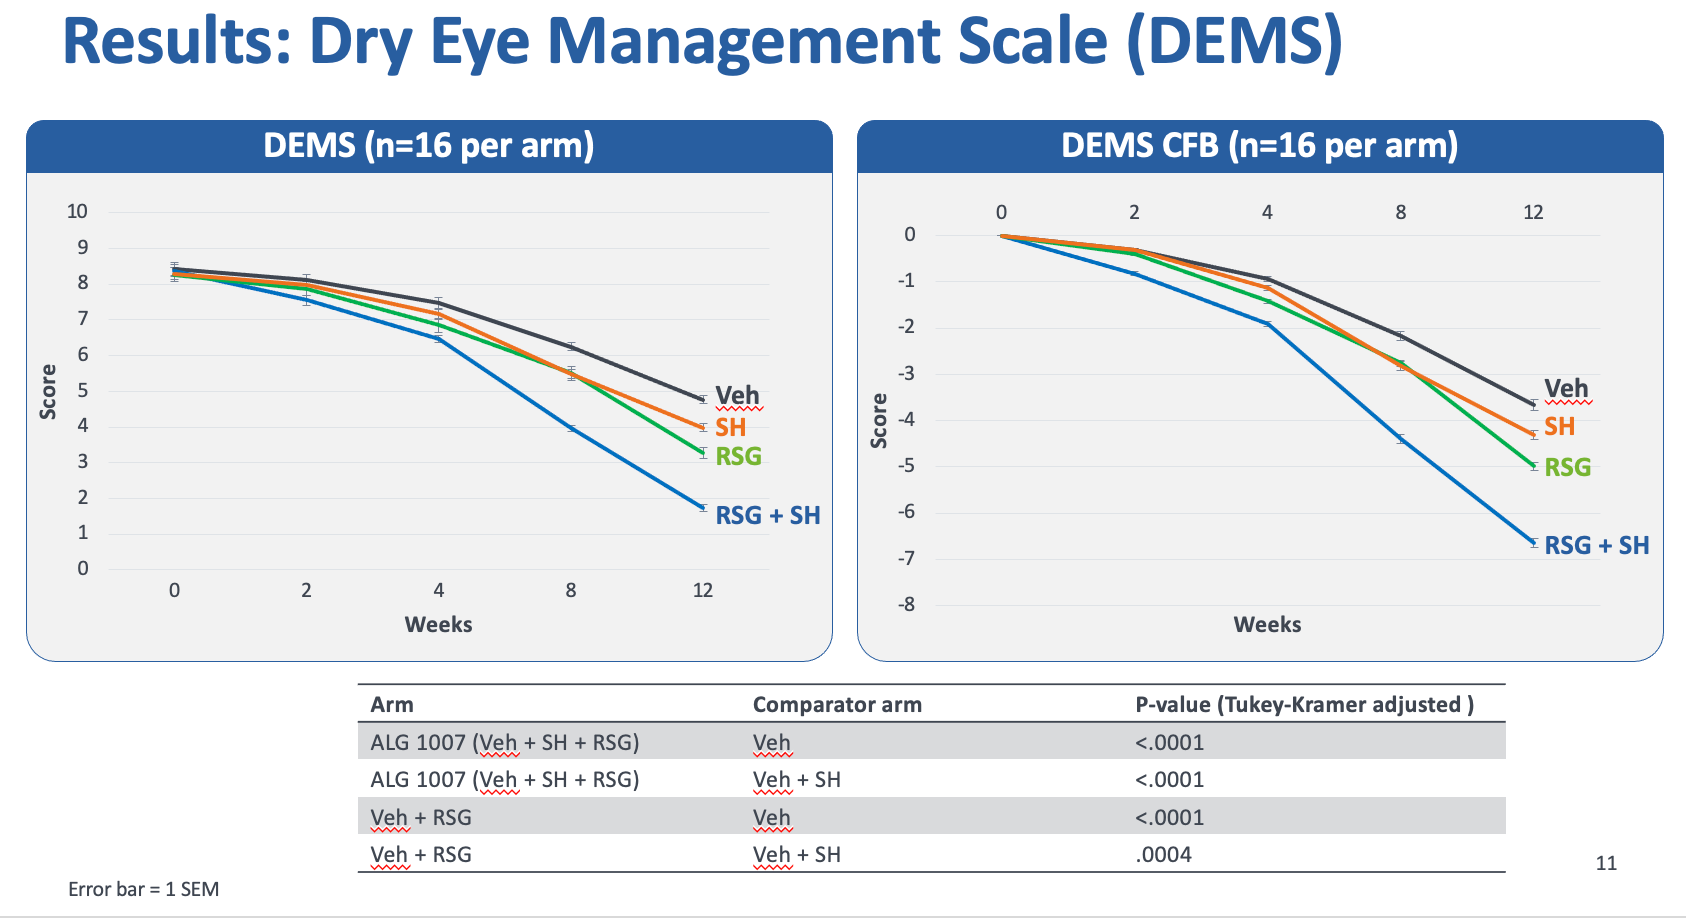 Results: Dry Eye Management Scale (DEMS)